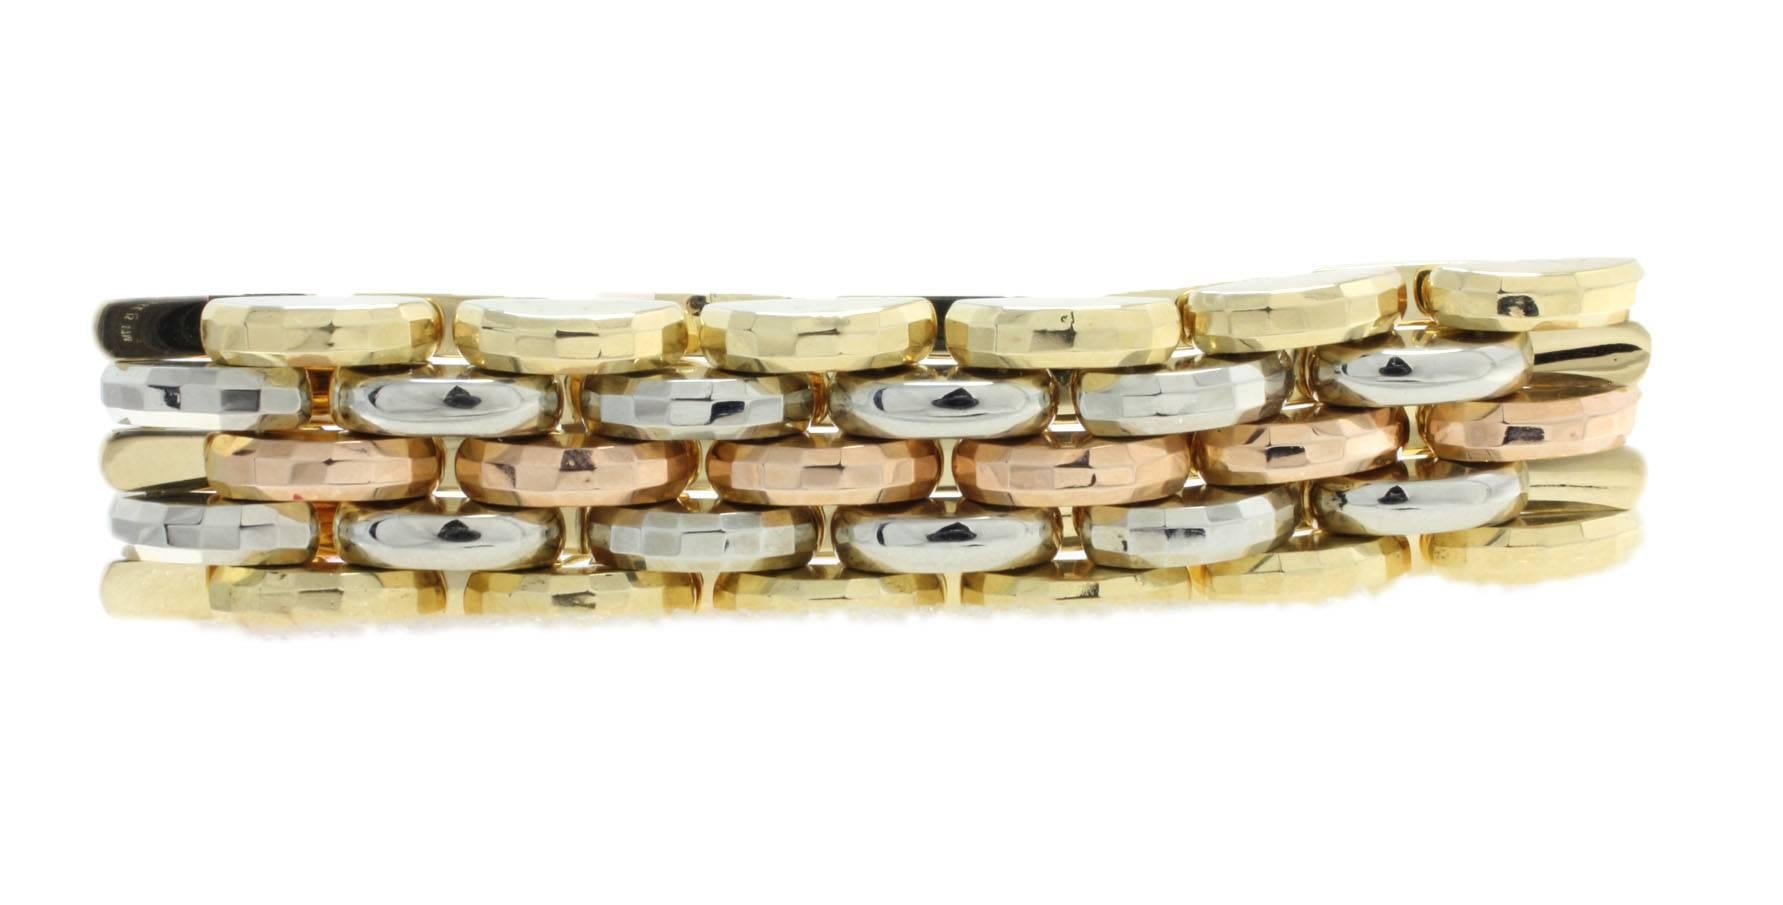 SHIPPING POLICY: 
No additional costs will be added to this order. 
Shipping costs will be totally covered by the seller (customs duties included).

Graceful and classic retro bracelet with a row of arch in 18 Kt rose gold,  a row of arch in 18 Kt